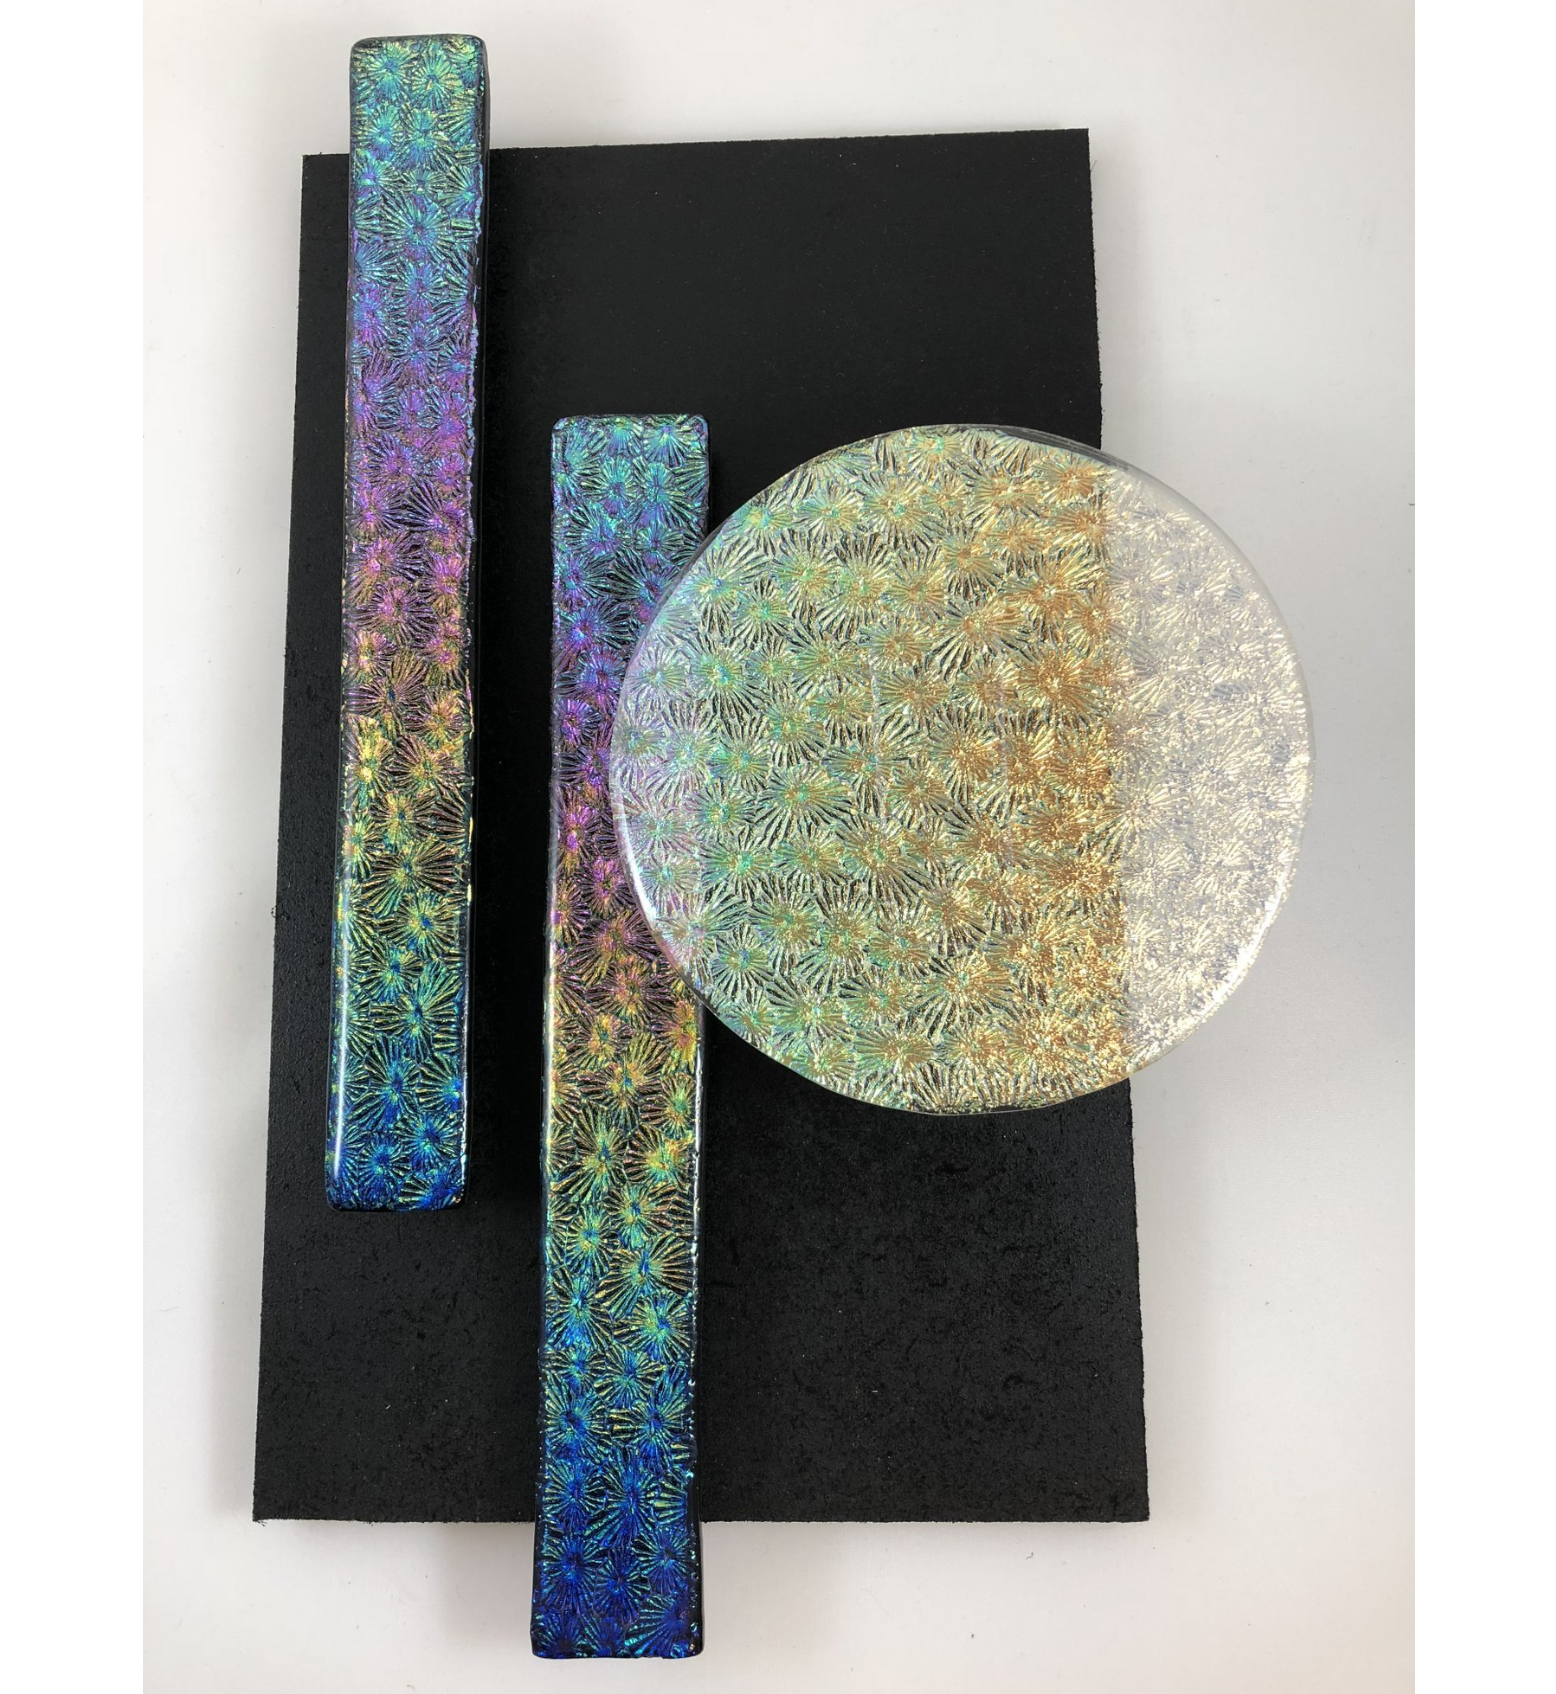 KR Fused Glass - Kathy Wagner#Booth 99